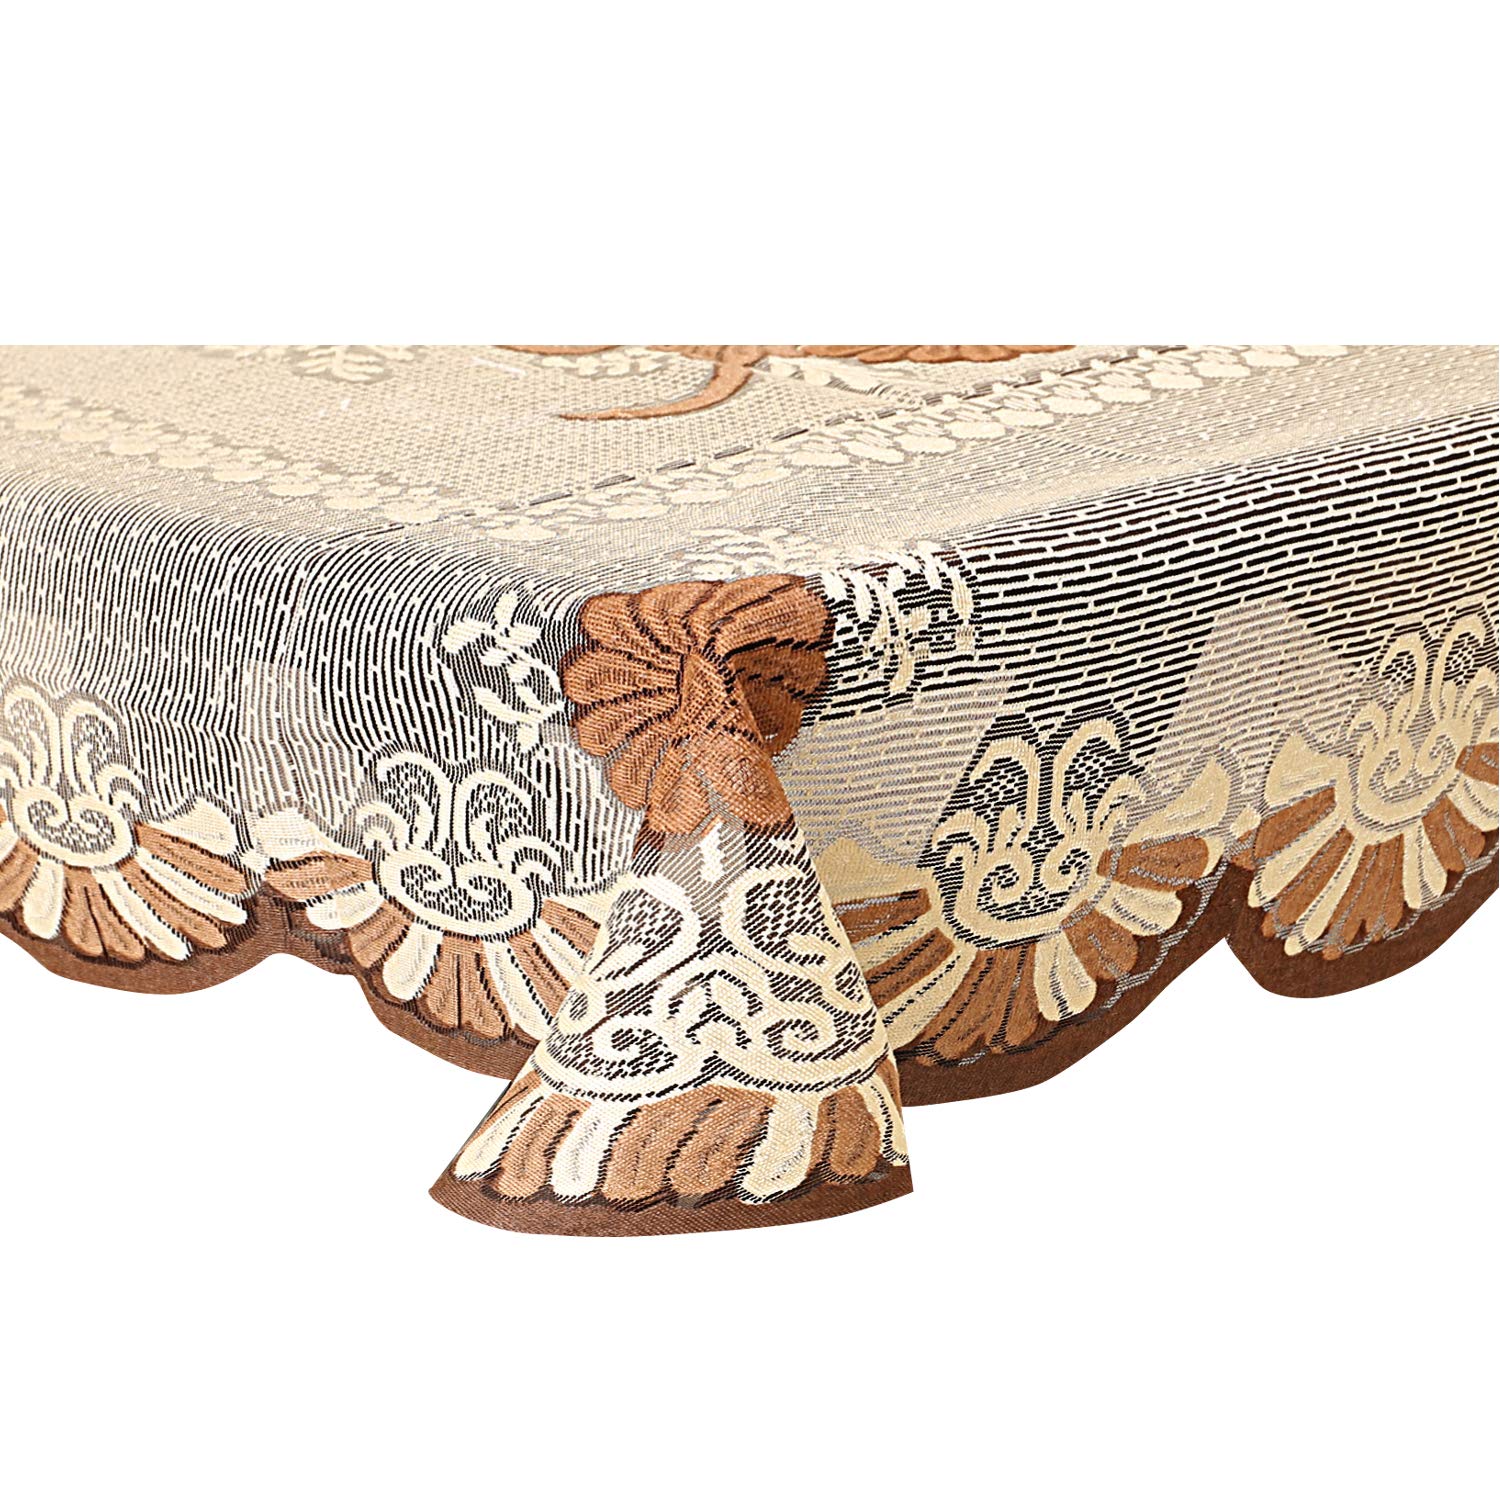 Kuber Industries Cotton Floral Rectangular 4 Seater Centre Table Cover| Size 150 x 100 x 1 CM (Brown)